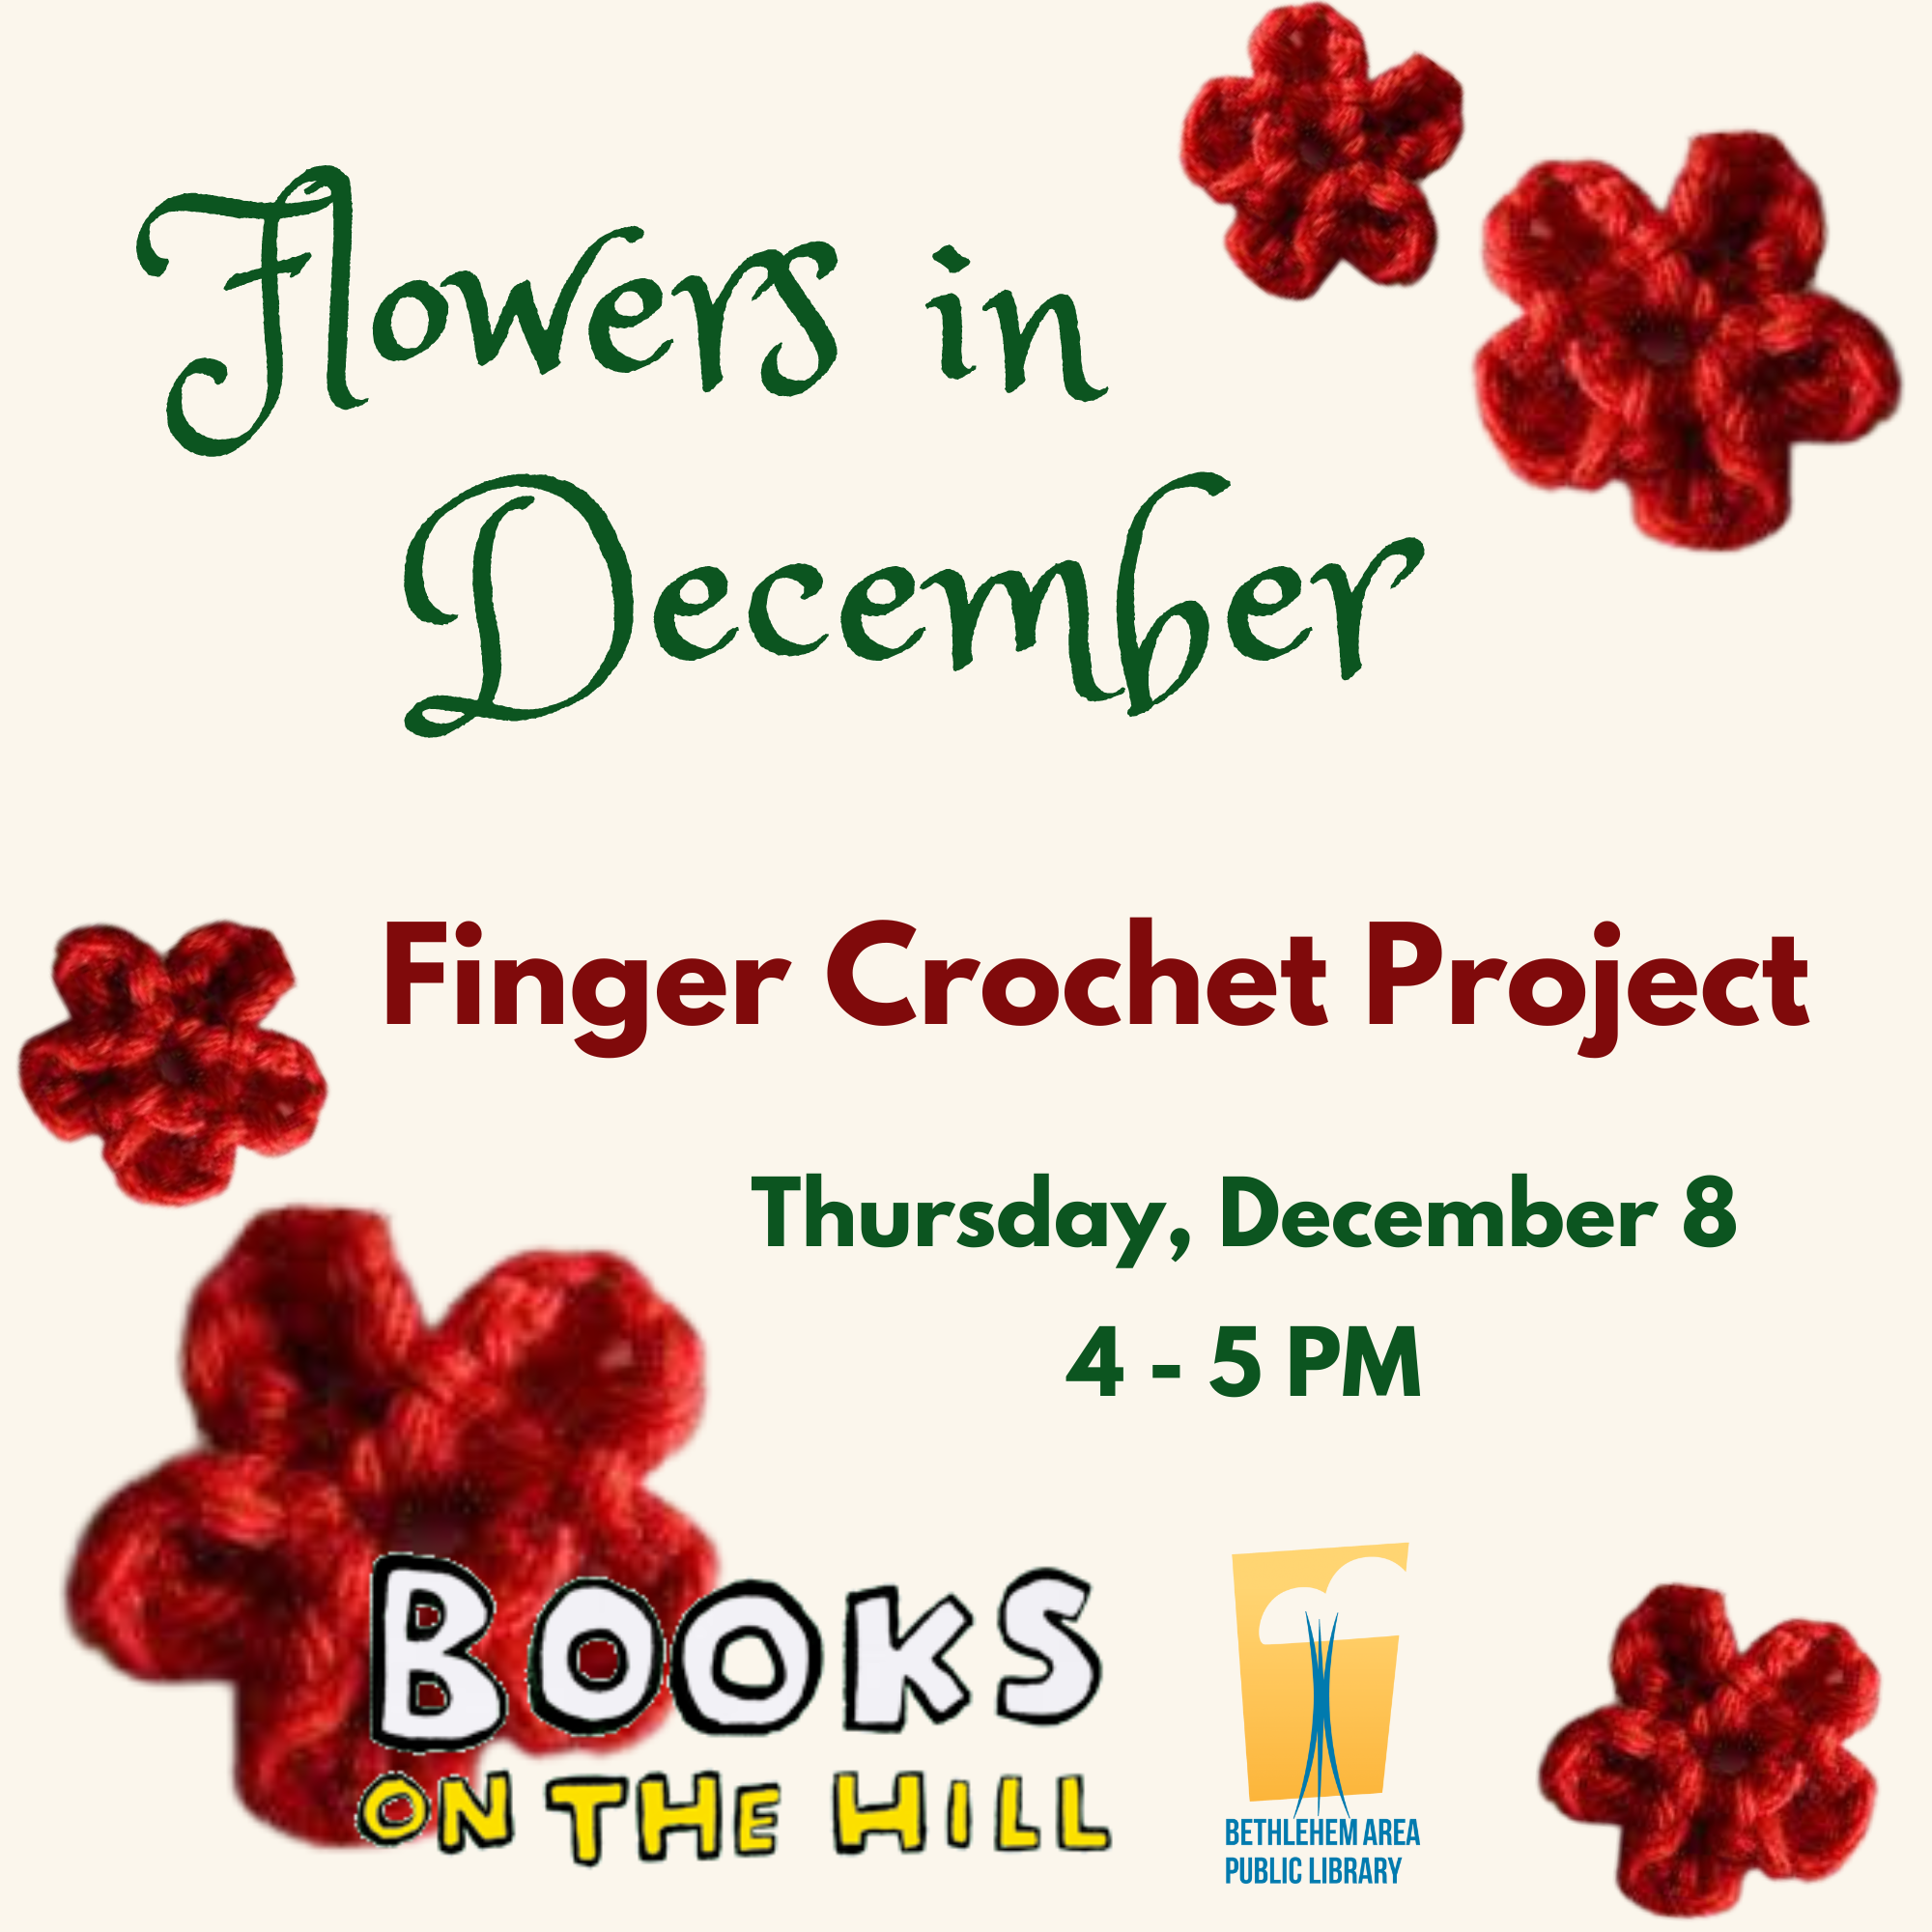 Flowers in December - Finger Crochet Project at Books on the Hill